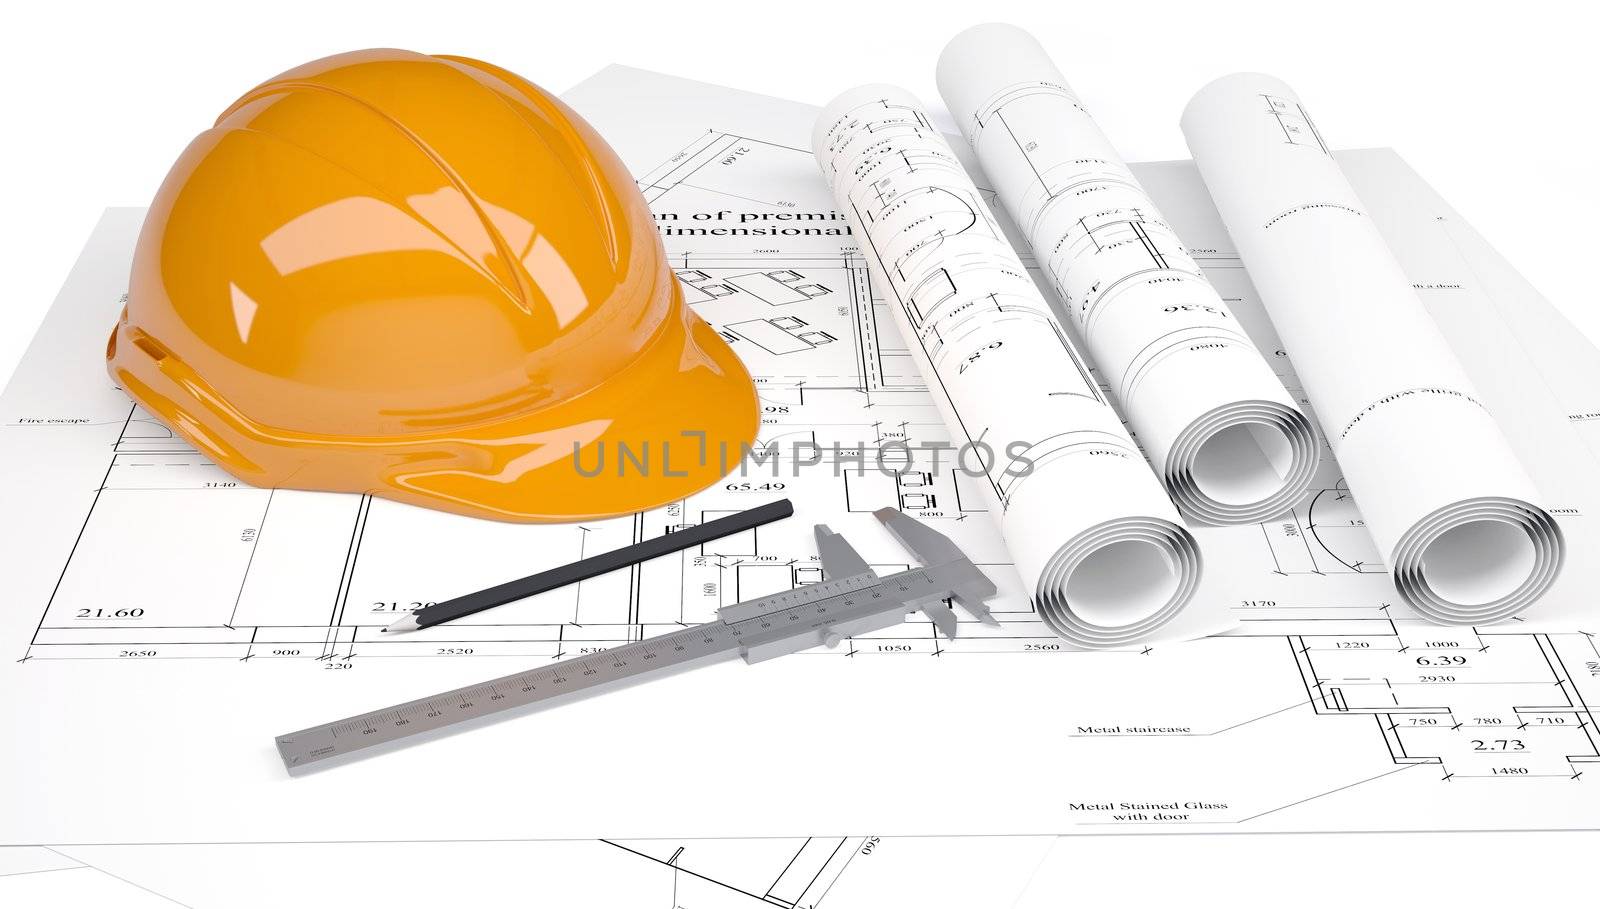 Construction helmet and calipers in the drawings. Isolated on white background